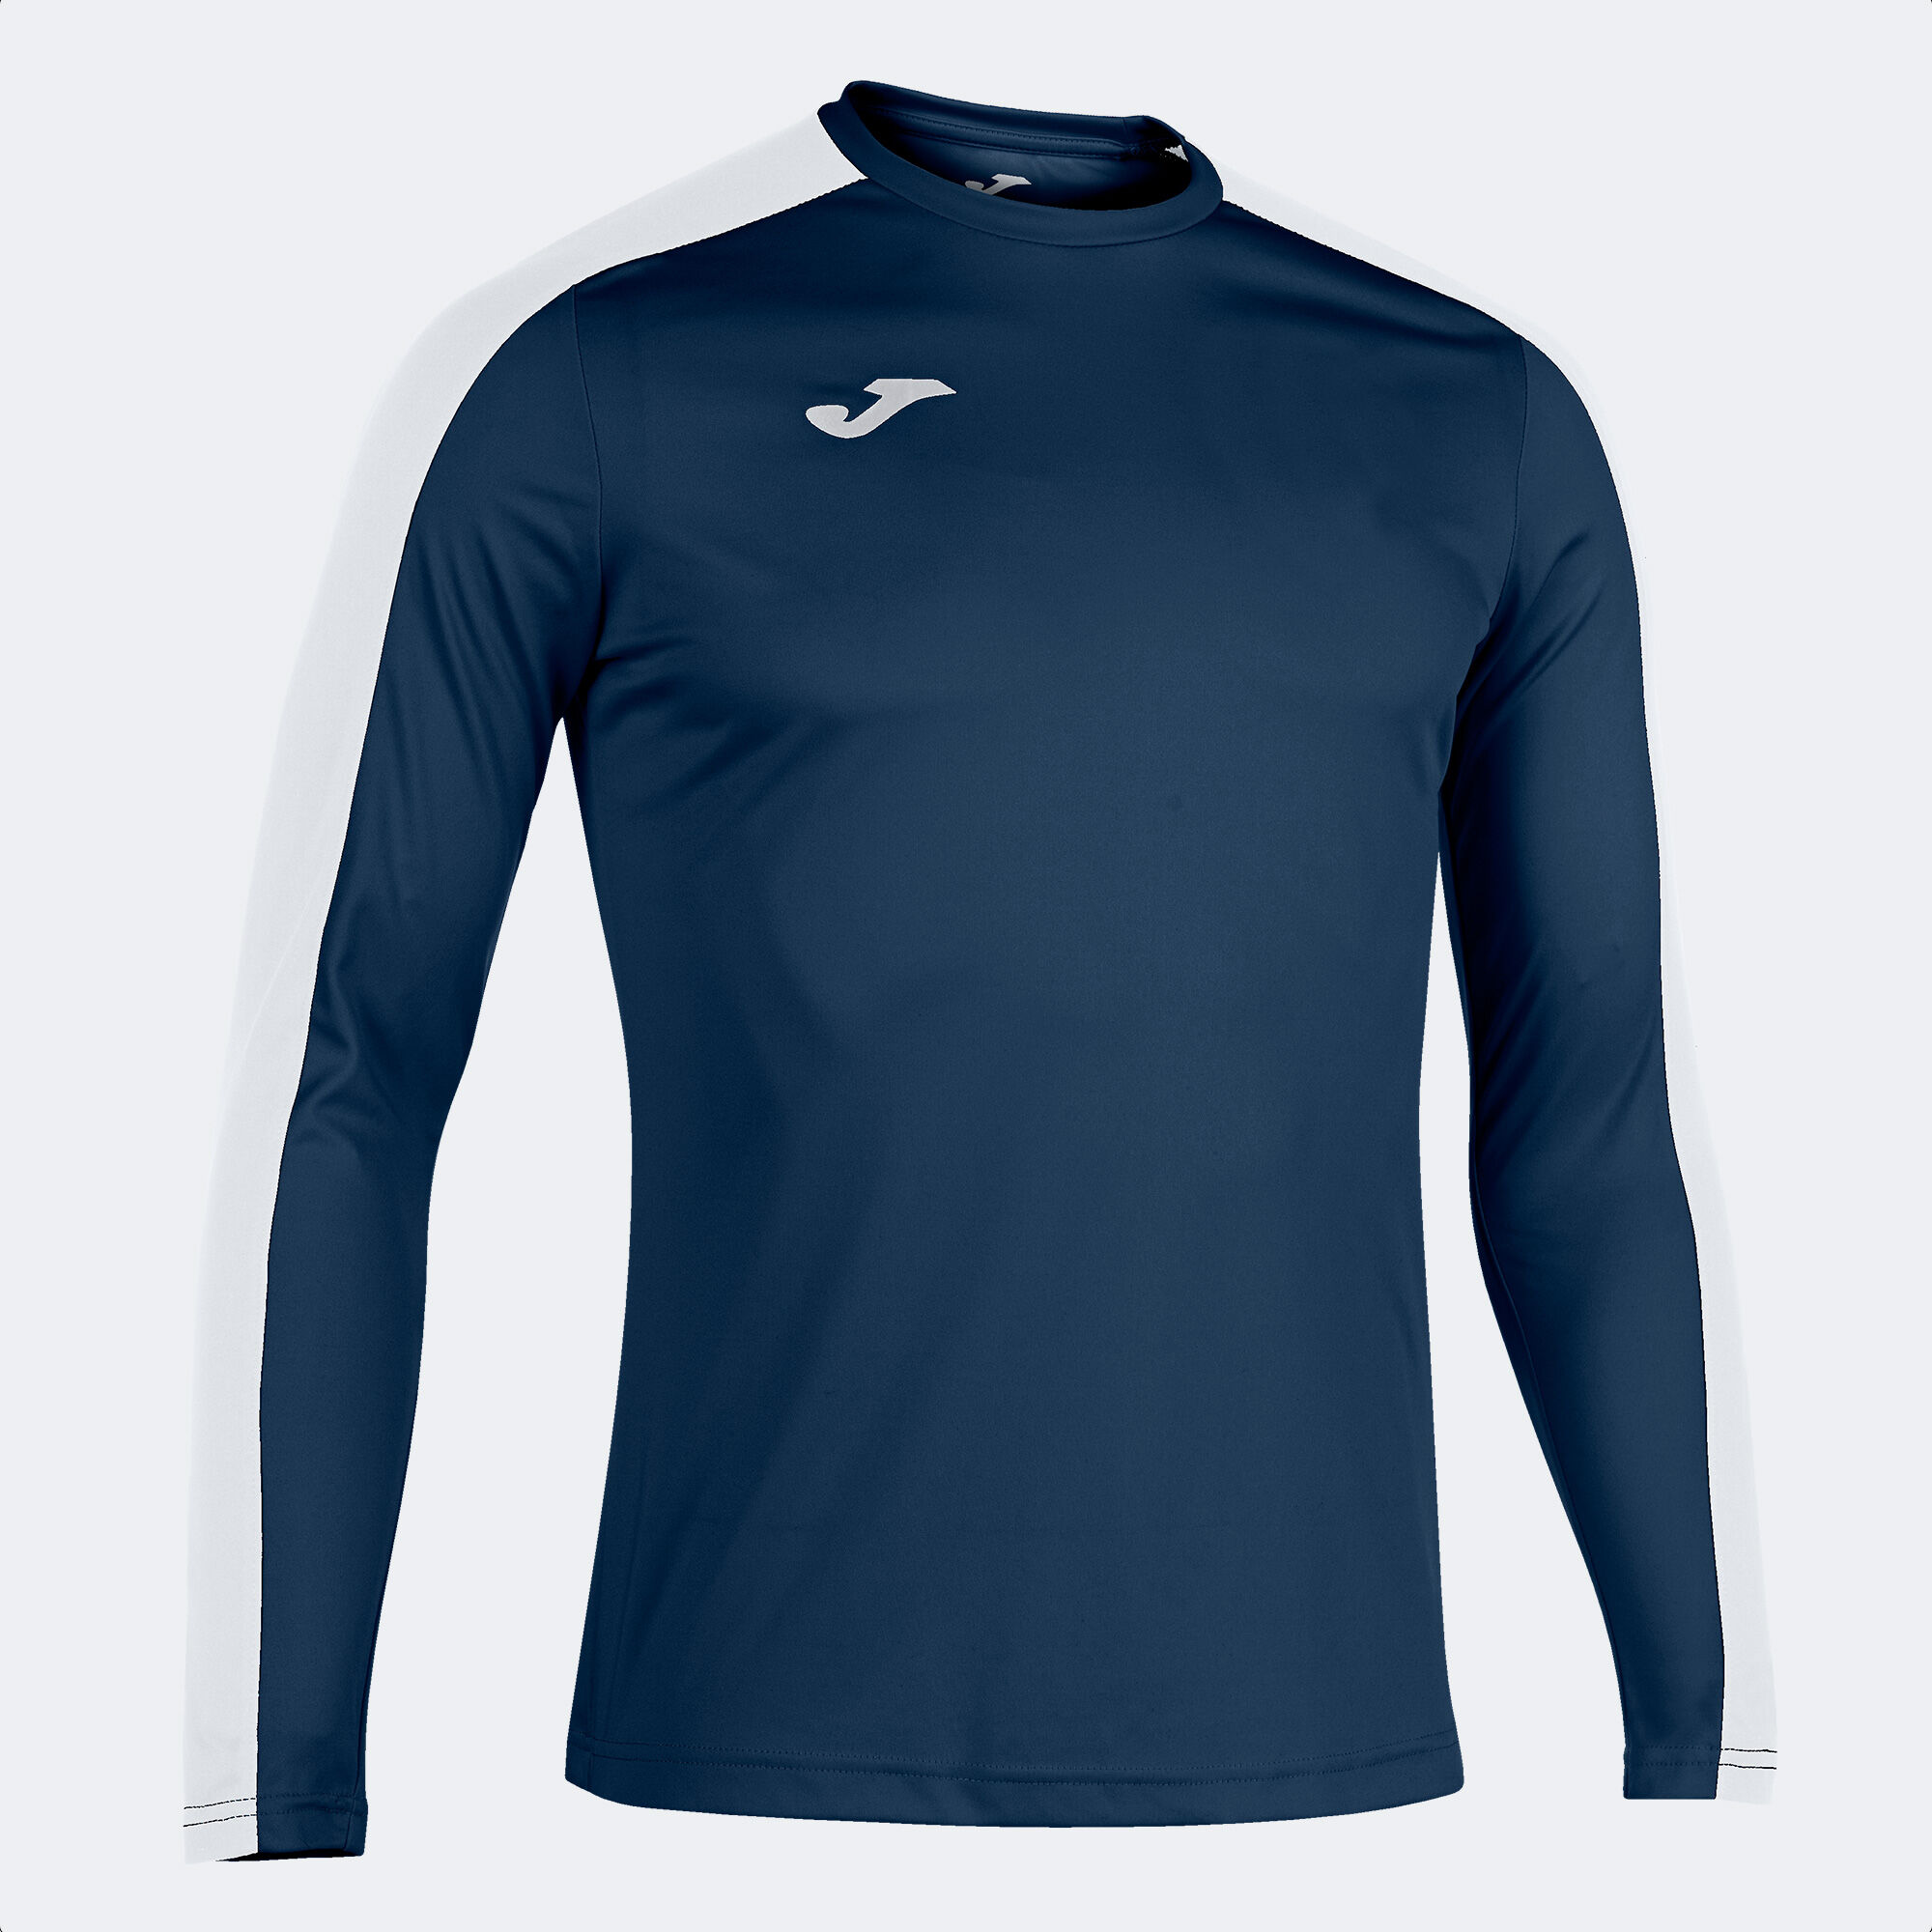 Maillot manches longues homme Academy III bleu marine blanc